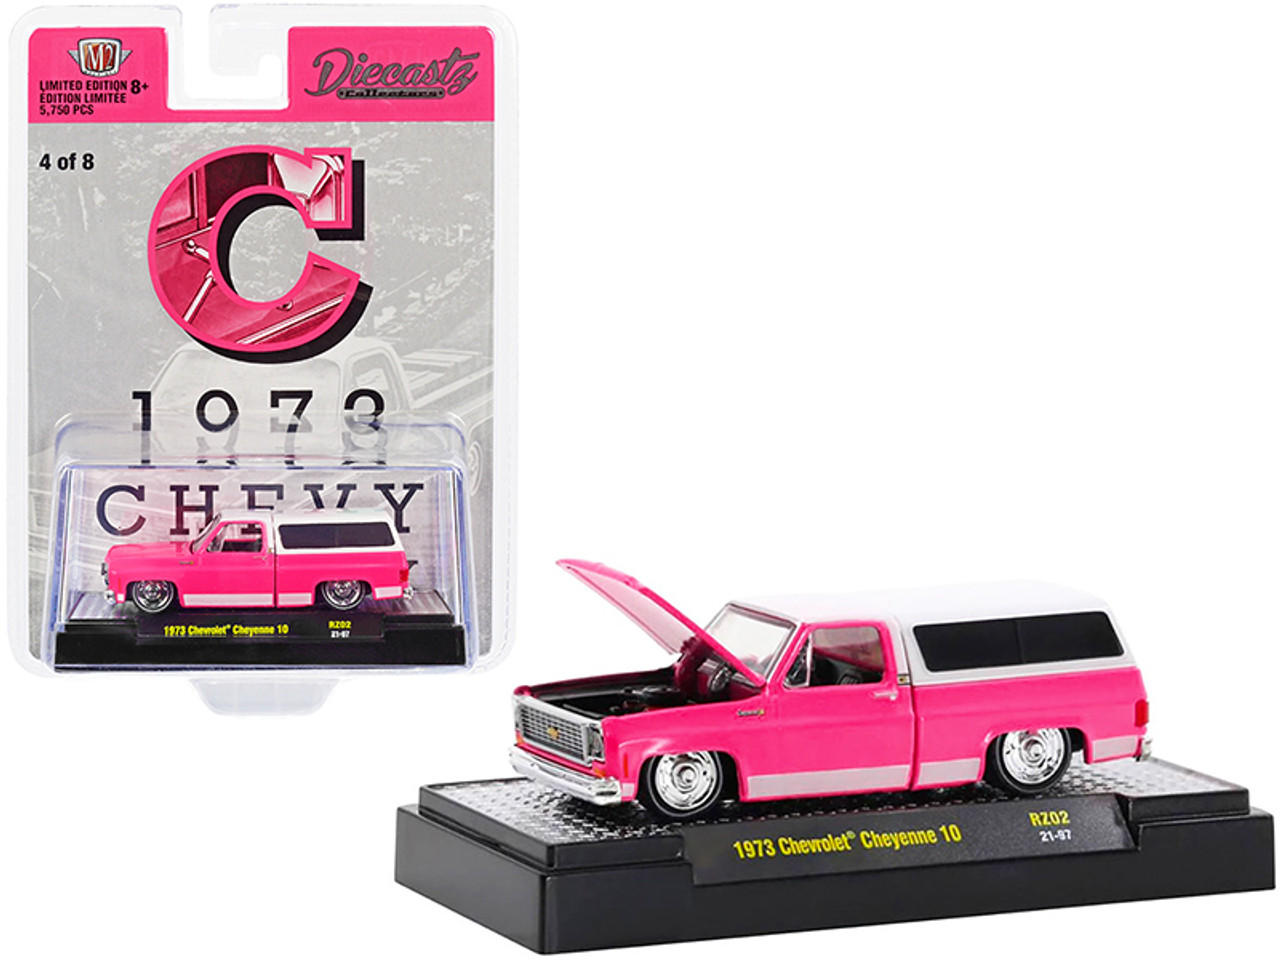 1973 Chevrolet Cheyenne 10 Pickup Truck with Camper Shell "C" Bright Pink with White Top and Stripes "Diecastz Collectors" "Riverside Show Exclusives" Limited Edition to 5750 pieces Worldwide 1/64 Diecast Model Car by M2 Machines